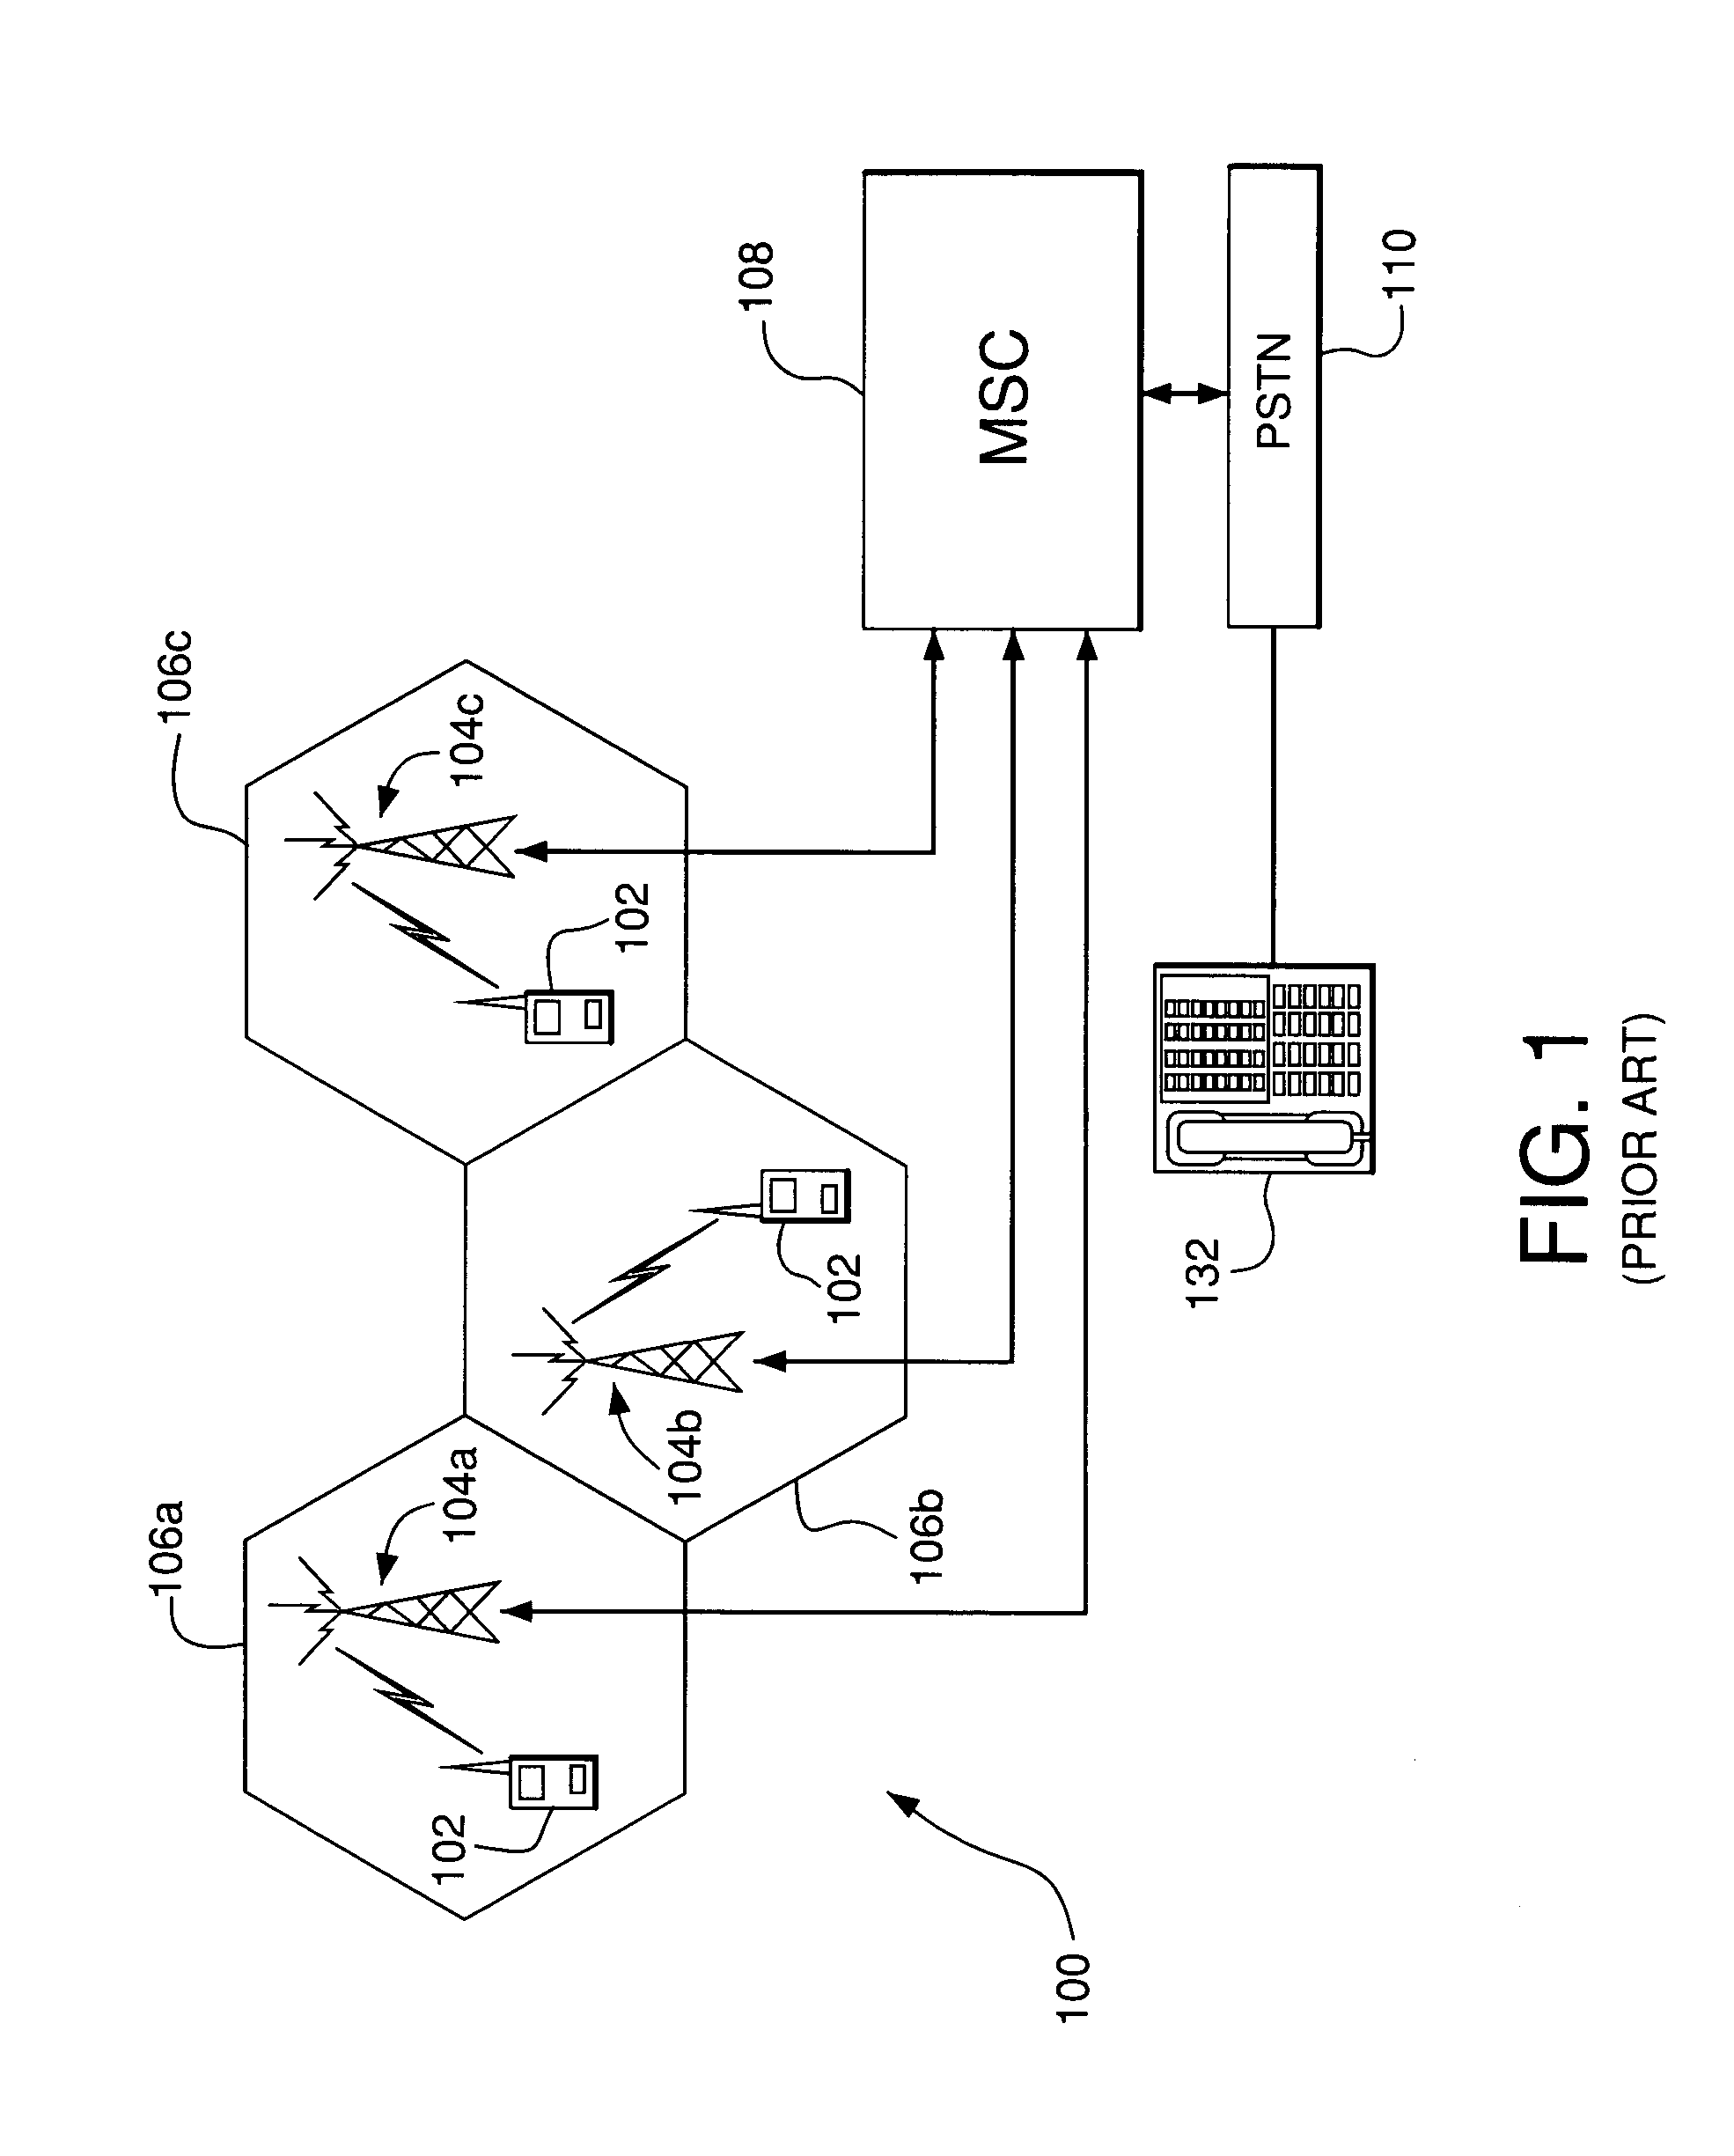 Wireless communication system with a supplemental communication sub-system